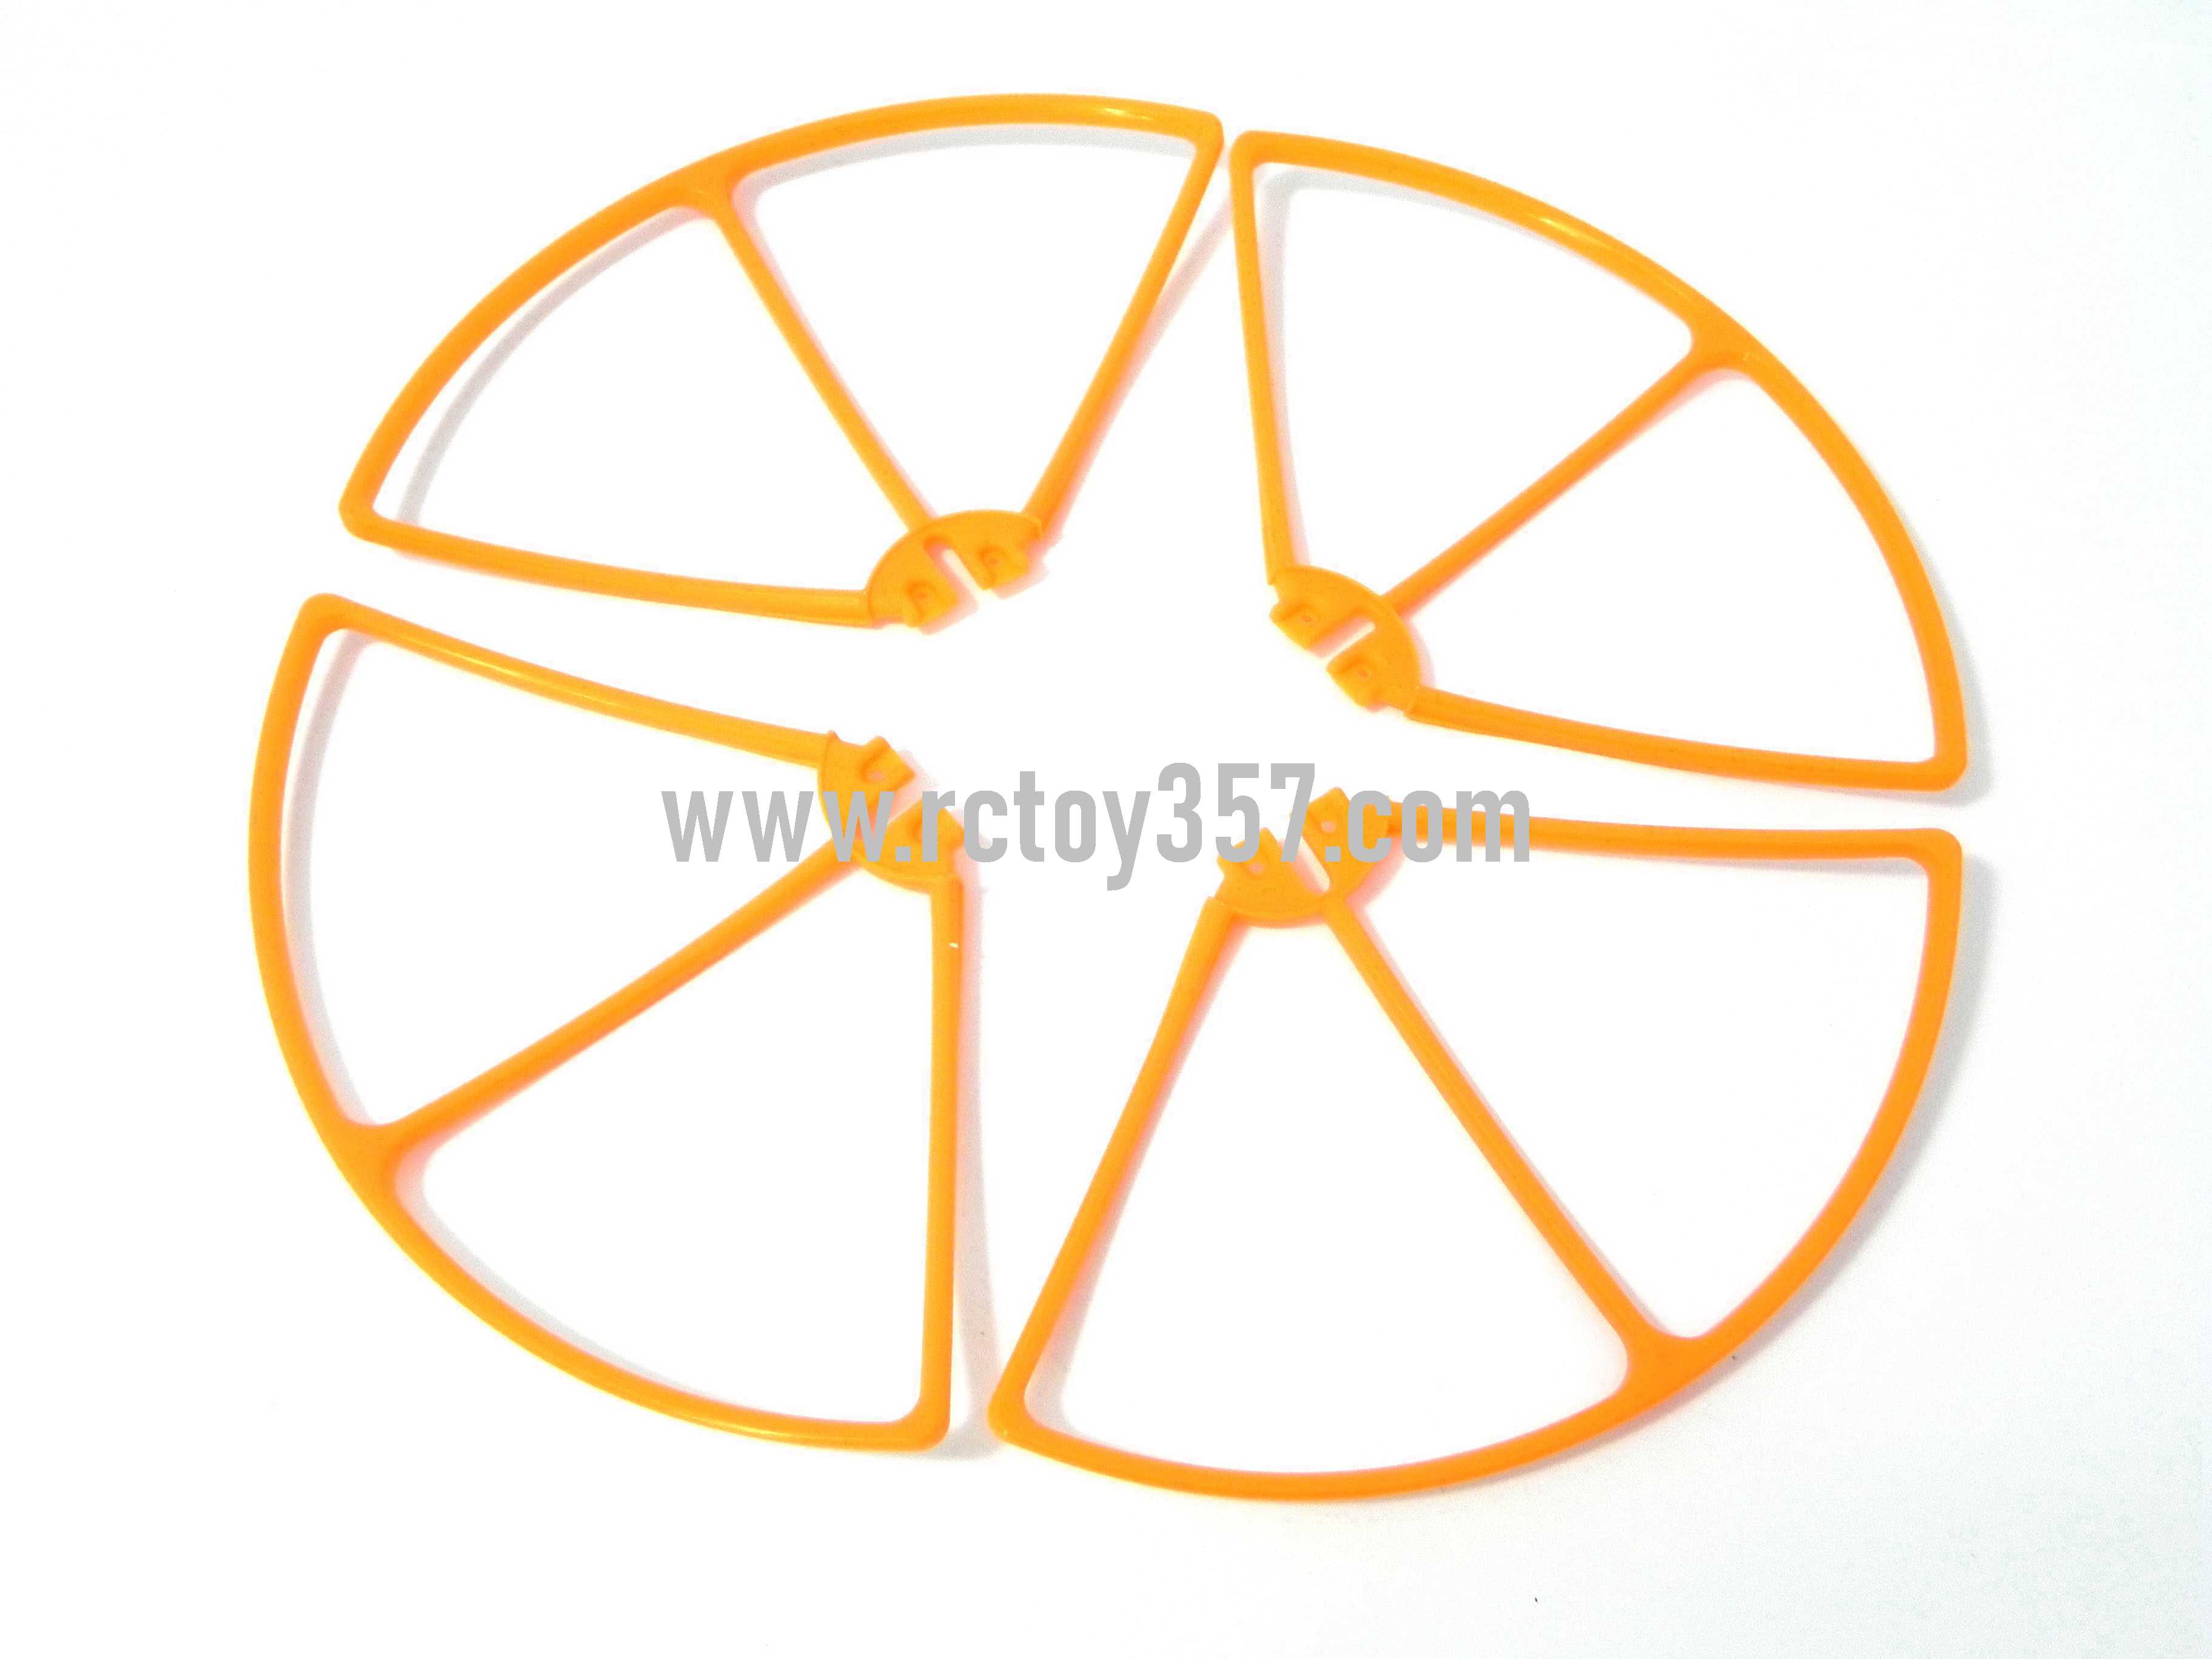 RCToy357.com - SYMA X8W Quadcopter toy Parts Outer frame(yellow)